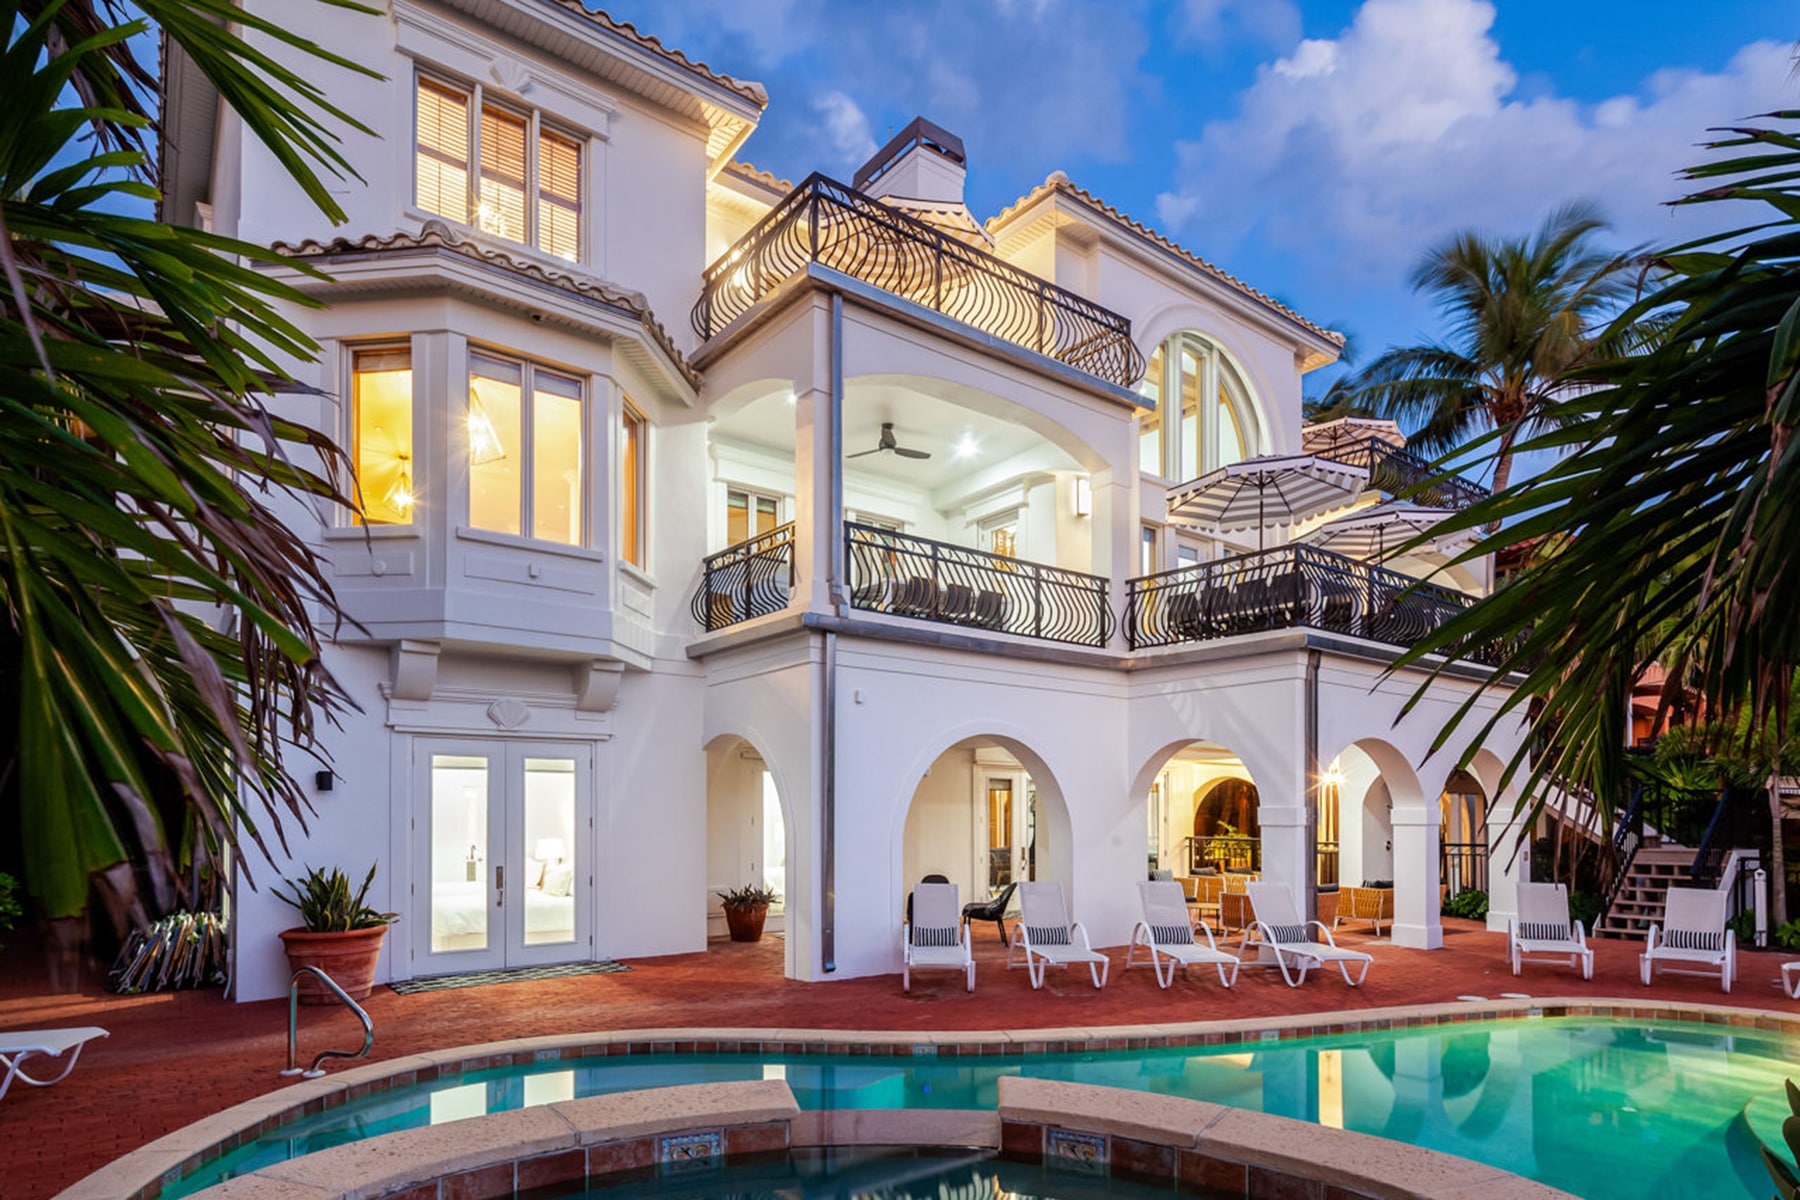 A white three floor estate with balconies, patio furniture and blue and white umbrellas, a patio area with a pool, hot tub and pool chairs, and a sandy walk way to the beach surrounded with palm trees in Captiva Island, FL